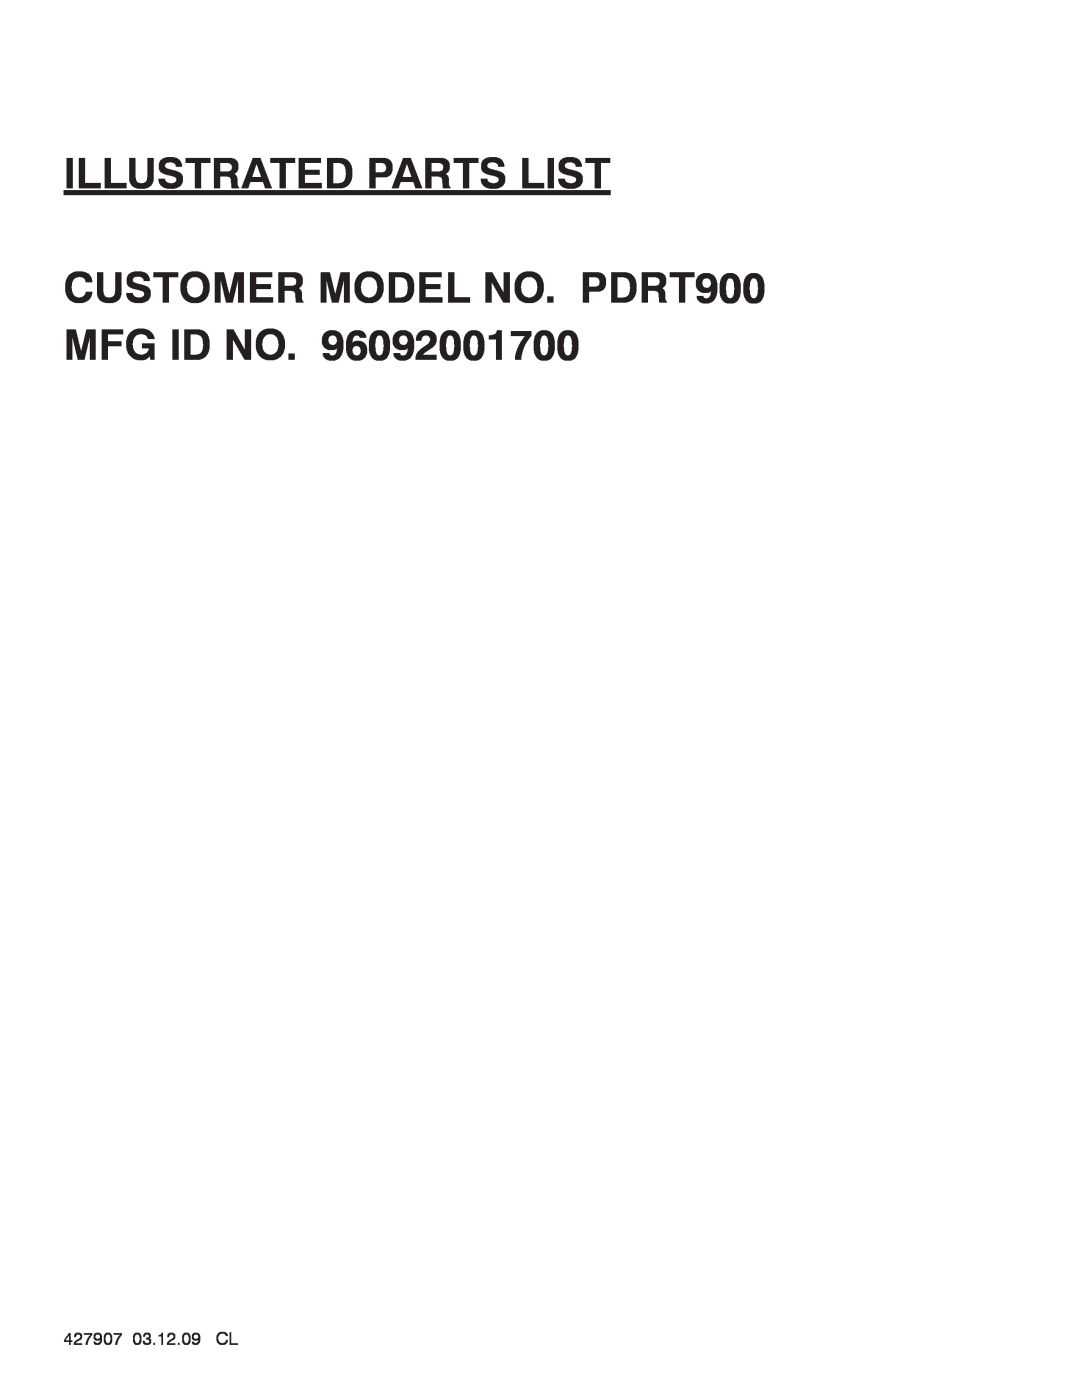 Poulan 96092001700 manual ILLUSTRATED PARTS LIST CUSTOMER MODEL NO. PDRT900 MFG ID NO, 427907 03.12.09 CL 